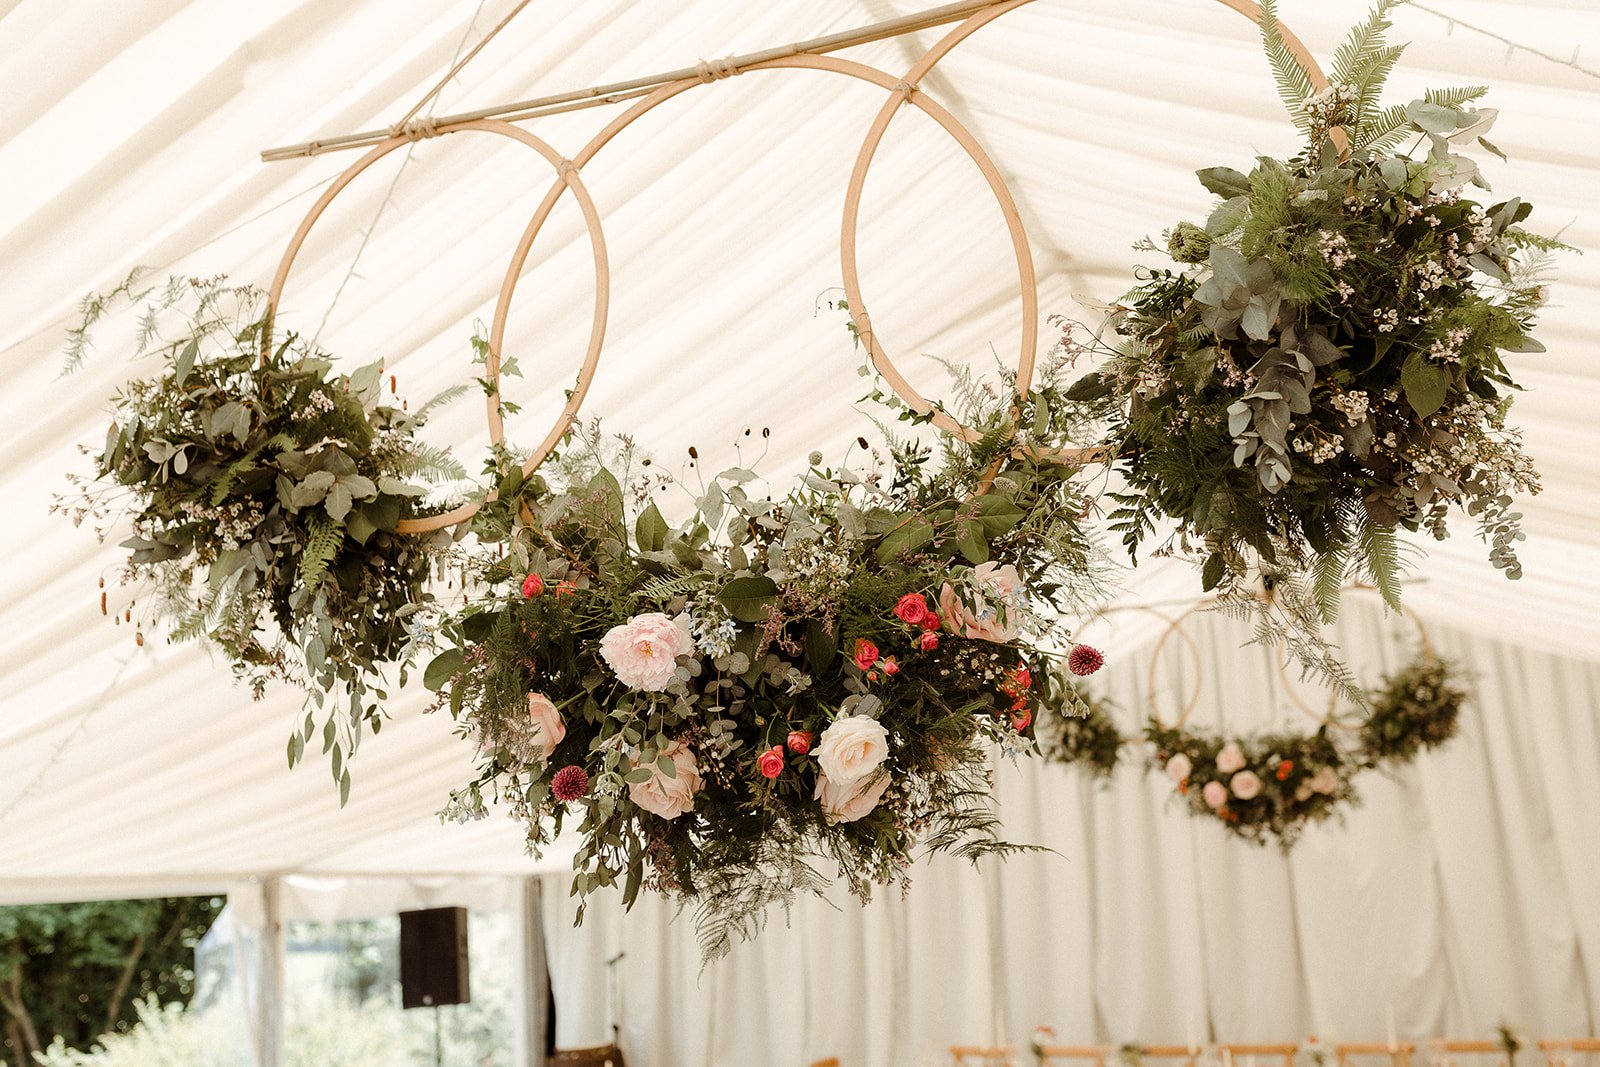 Hamswell House Wedding Marquee Ceiling Decoration